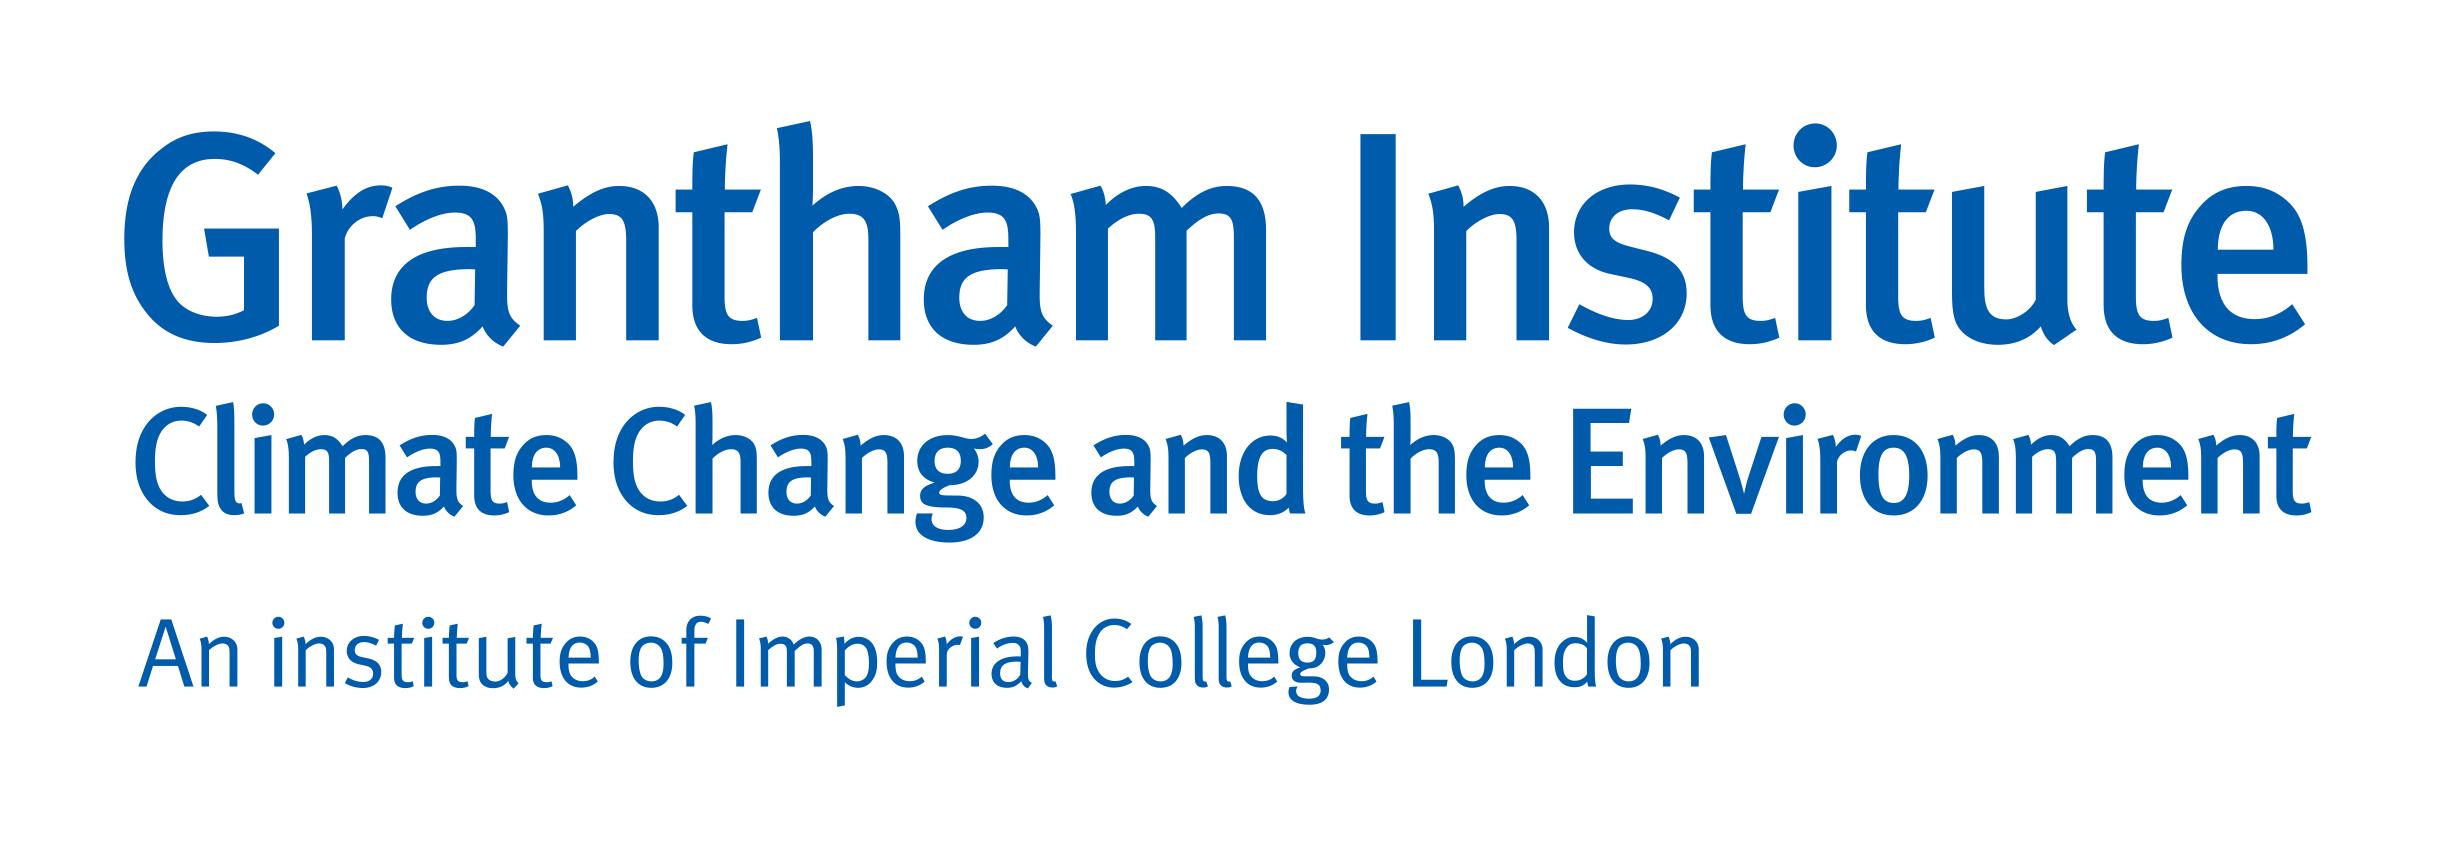 Grantham Institute Climate Change and the Environment